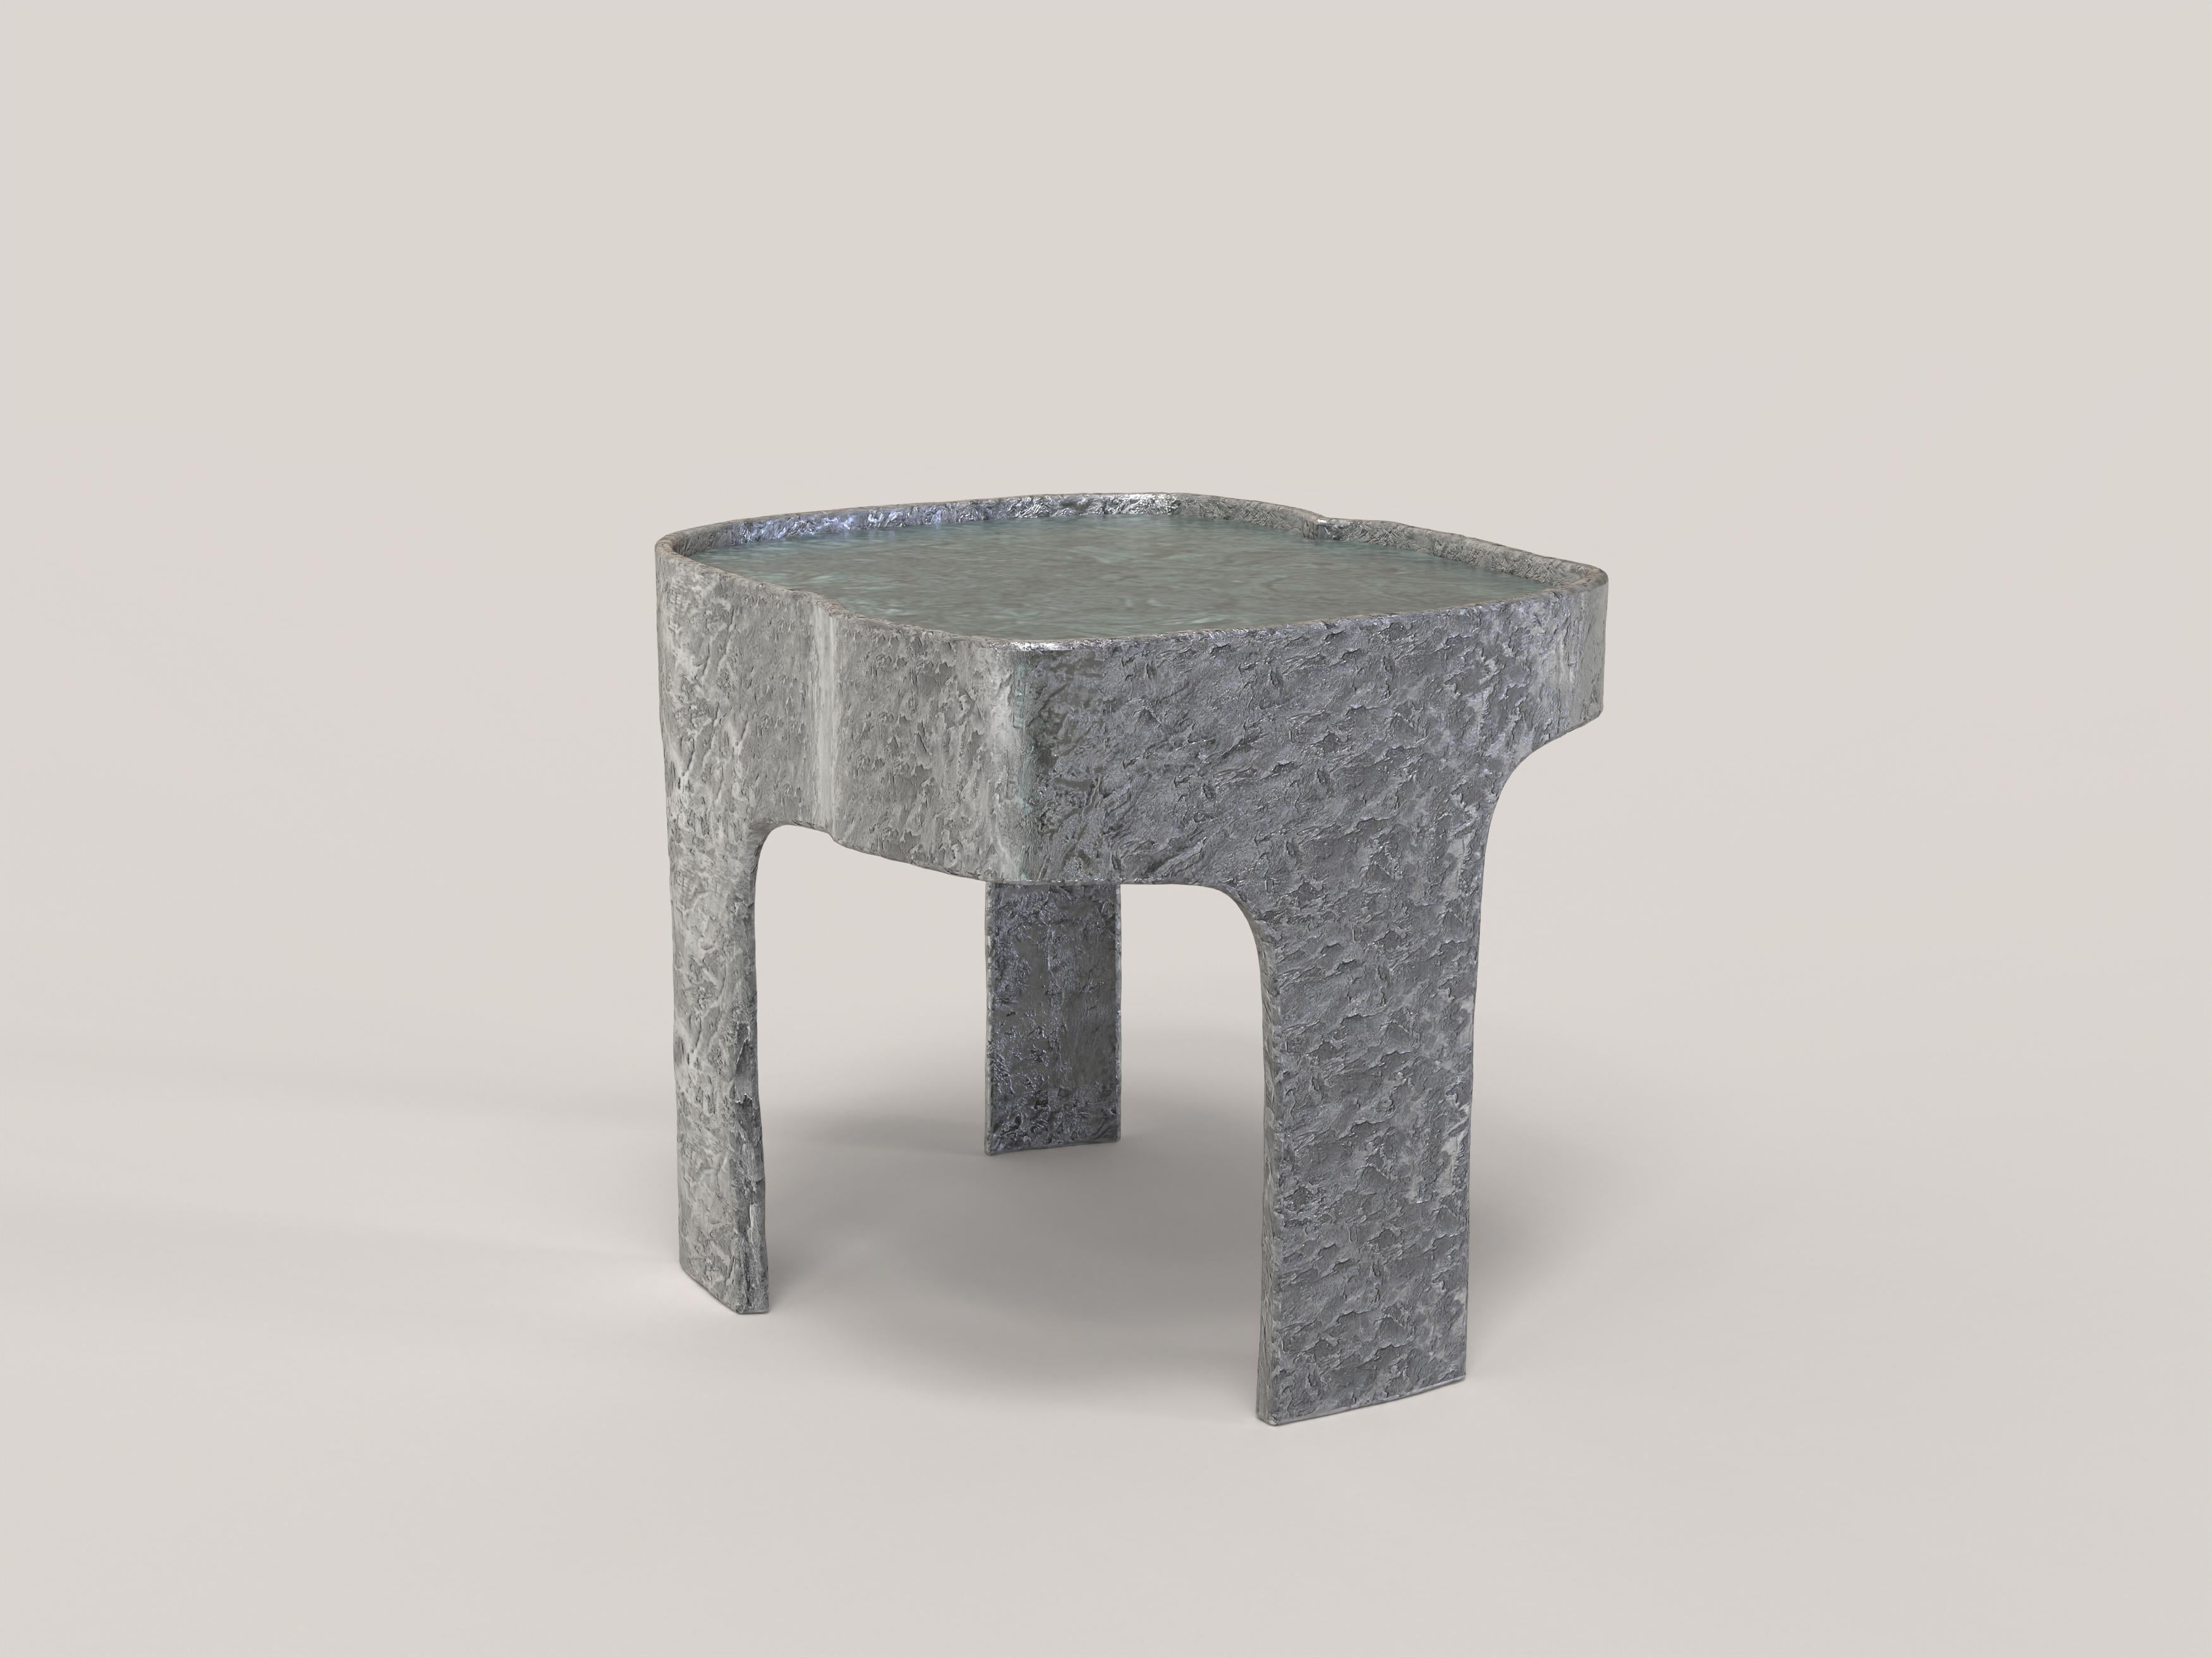 Sumatra V1 Side Table by Edizione Limitata
Limited Edition of 15 + 3 pieces. Signed and numbered.
Dimensions: D 44 x W 38 x H 37 cm.
Materials: Cast aluminum and Green Guatemala marble.

Sumatra is a 21st Century collection of tables made by Italian